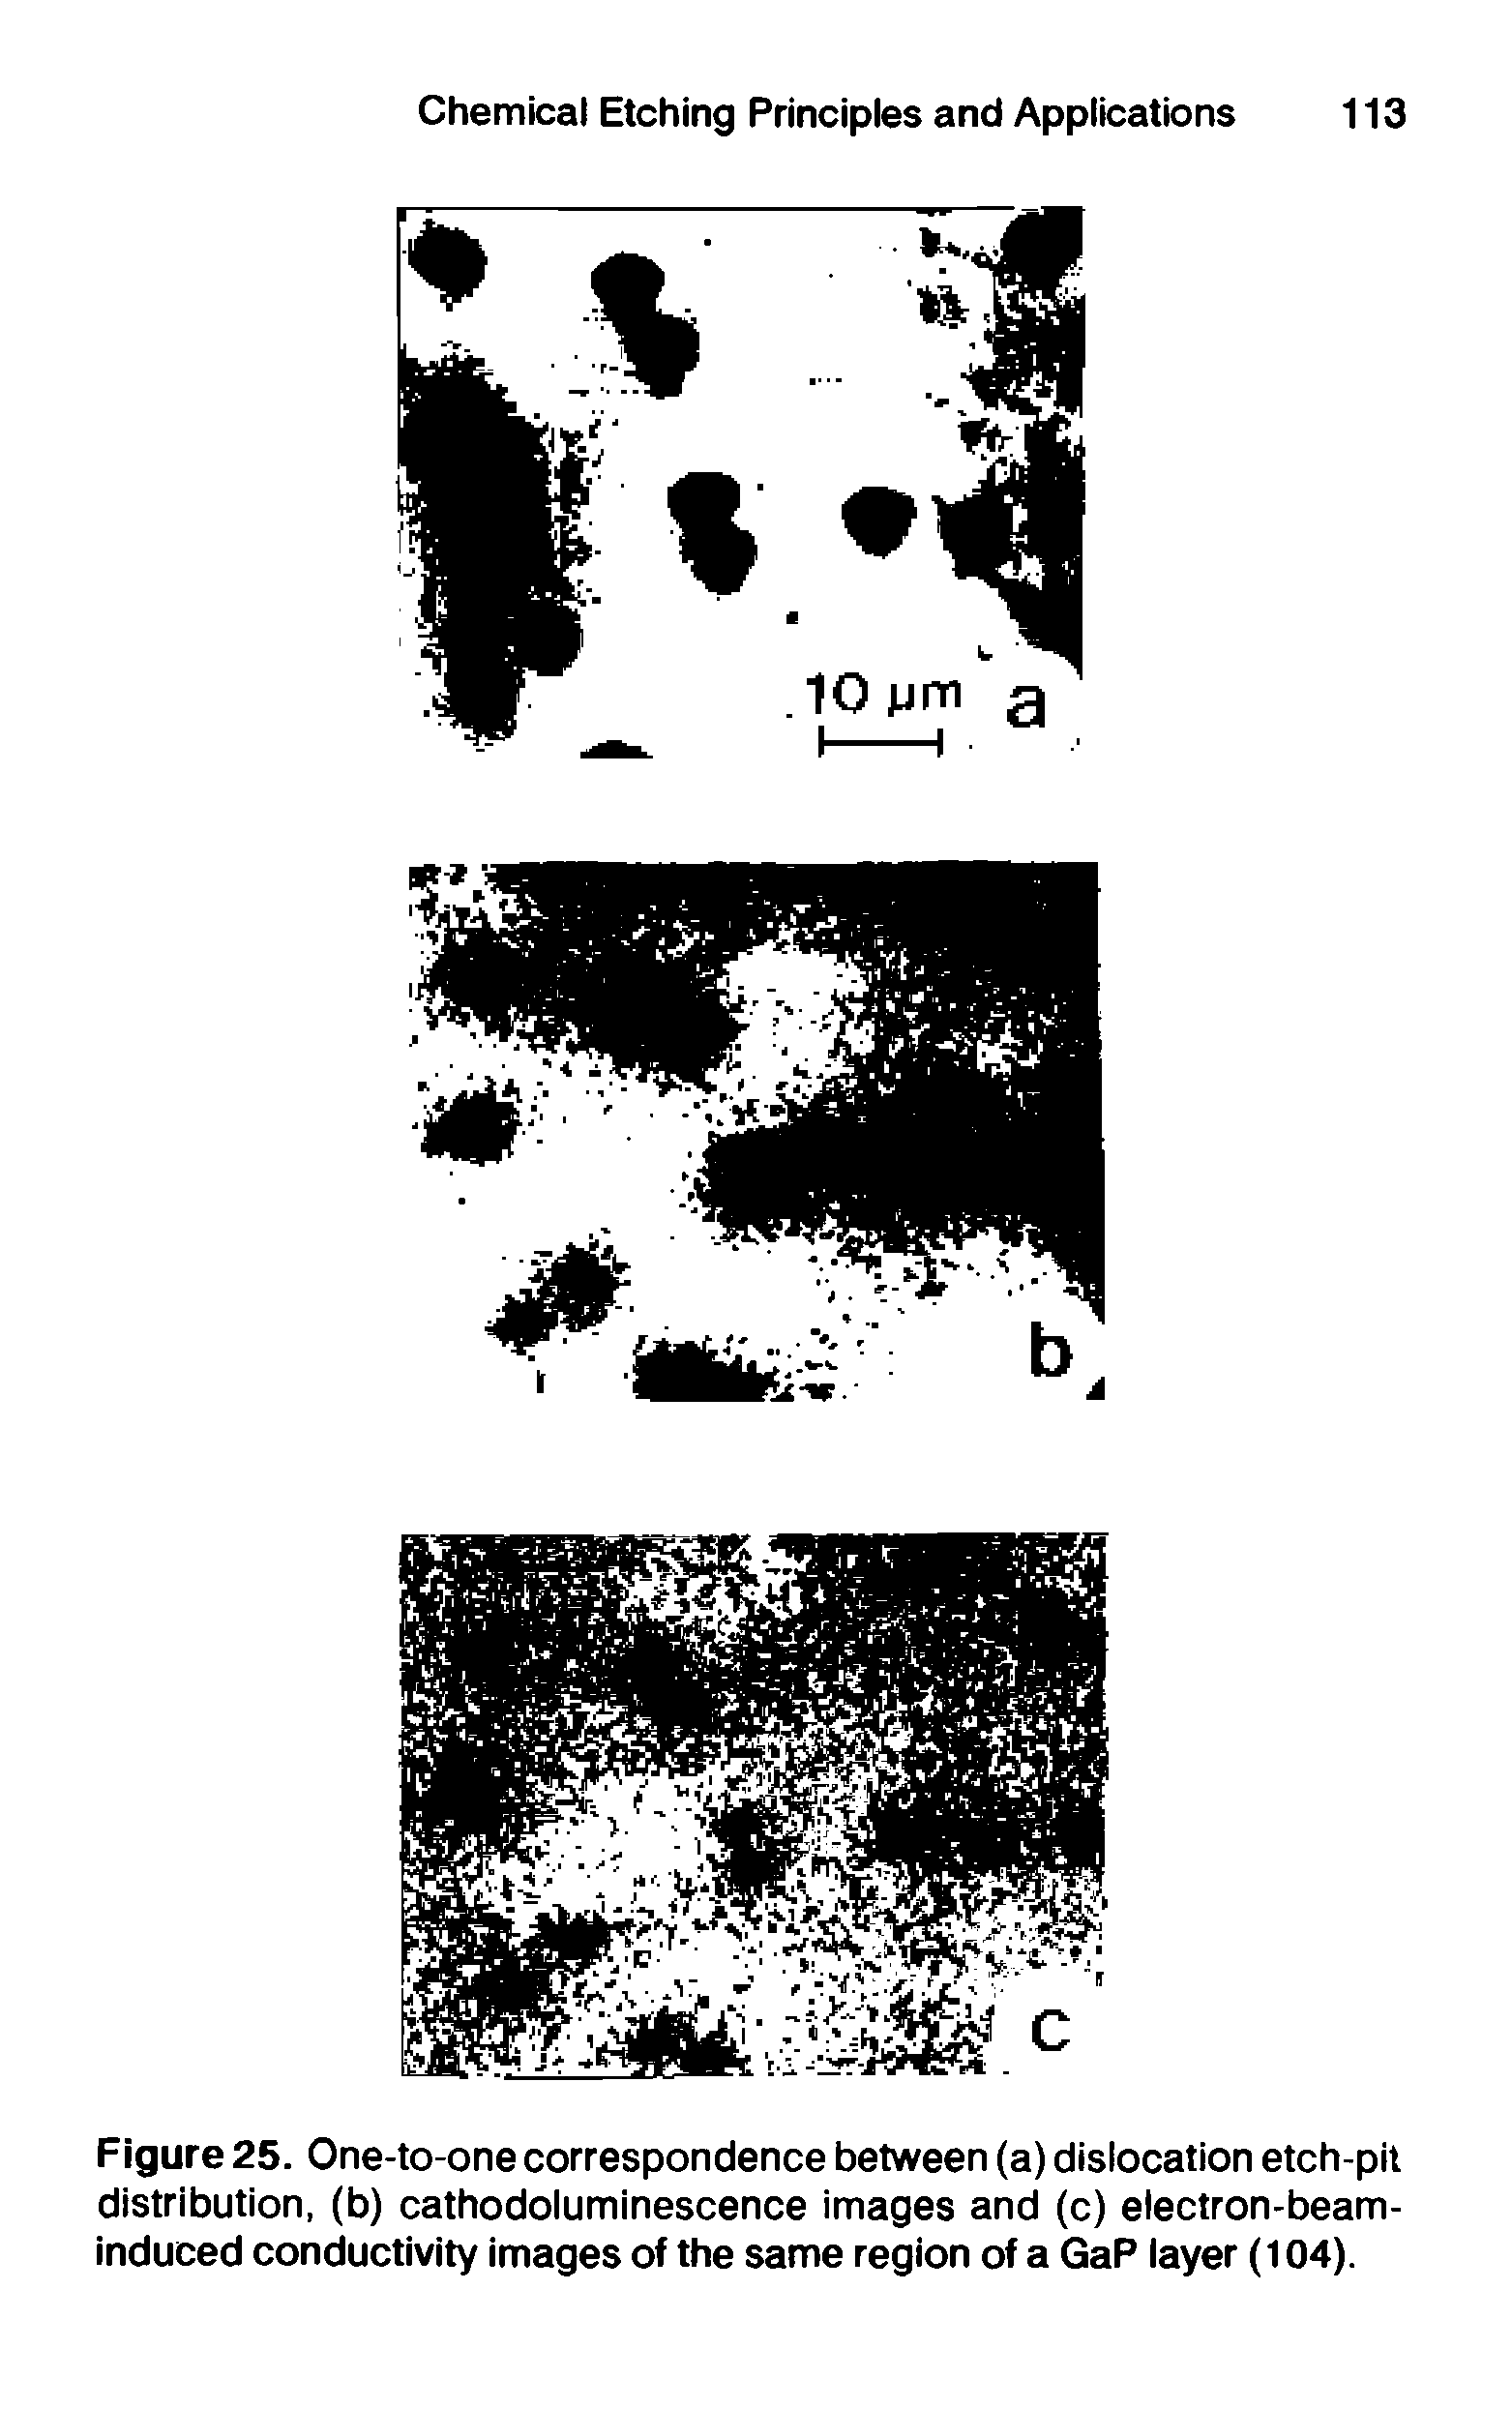 Figure 25. One-to-one correspondence between (a) dislocation etch-pit distribution, (b) cathodoluminescence images and (c) electron-beam-induced conductivity images of the same region of a GaP layer (104).